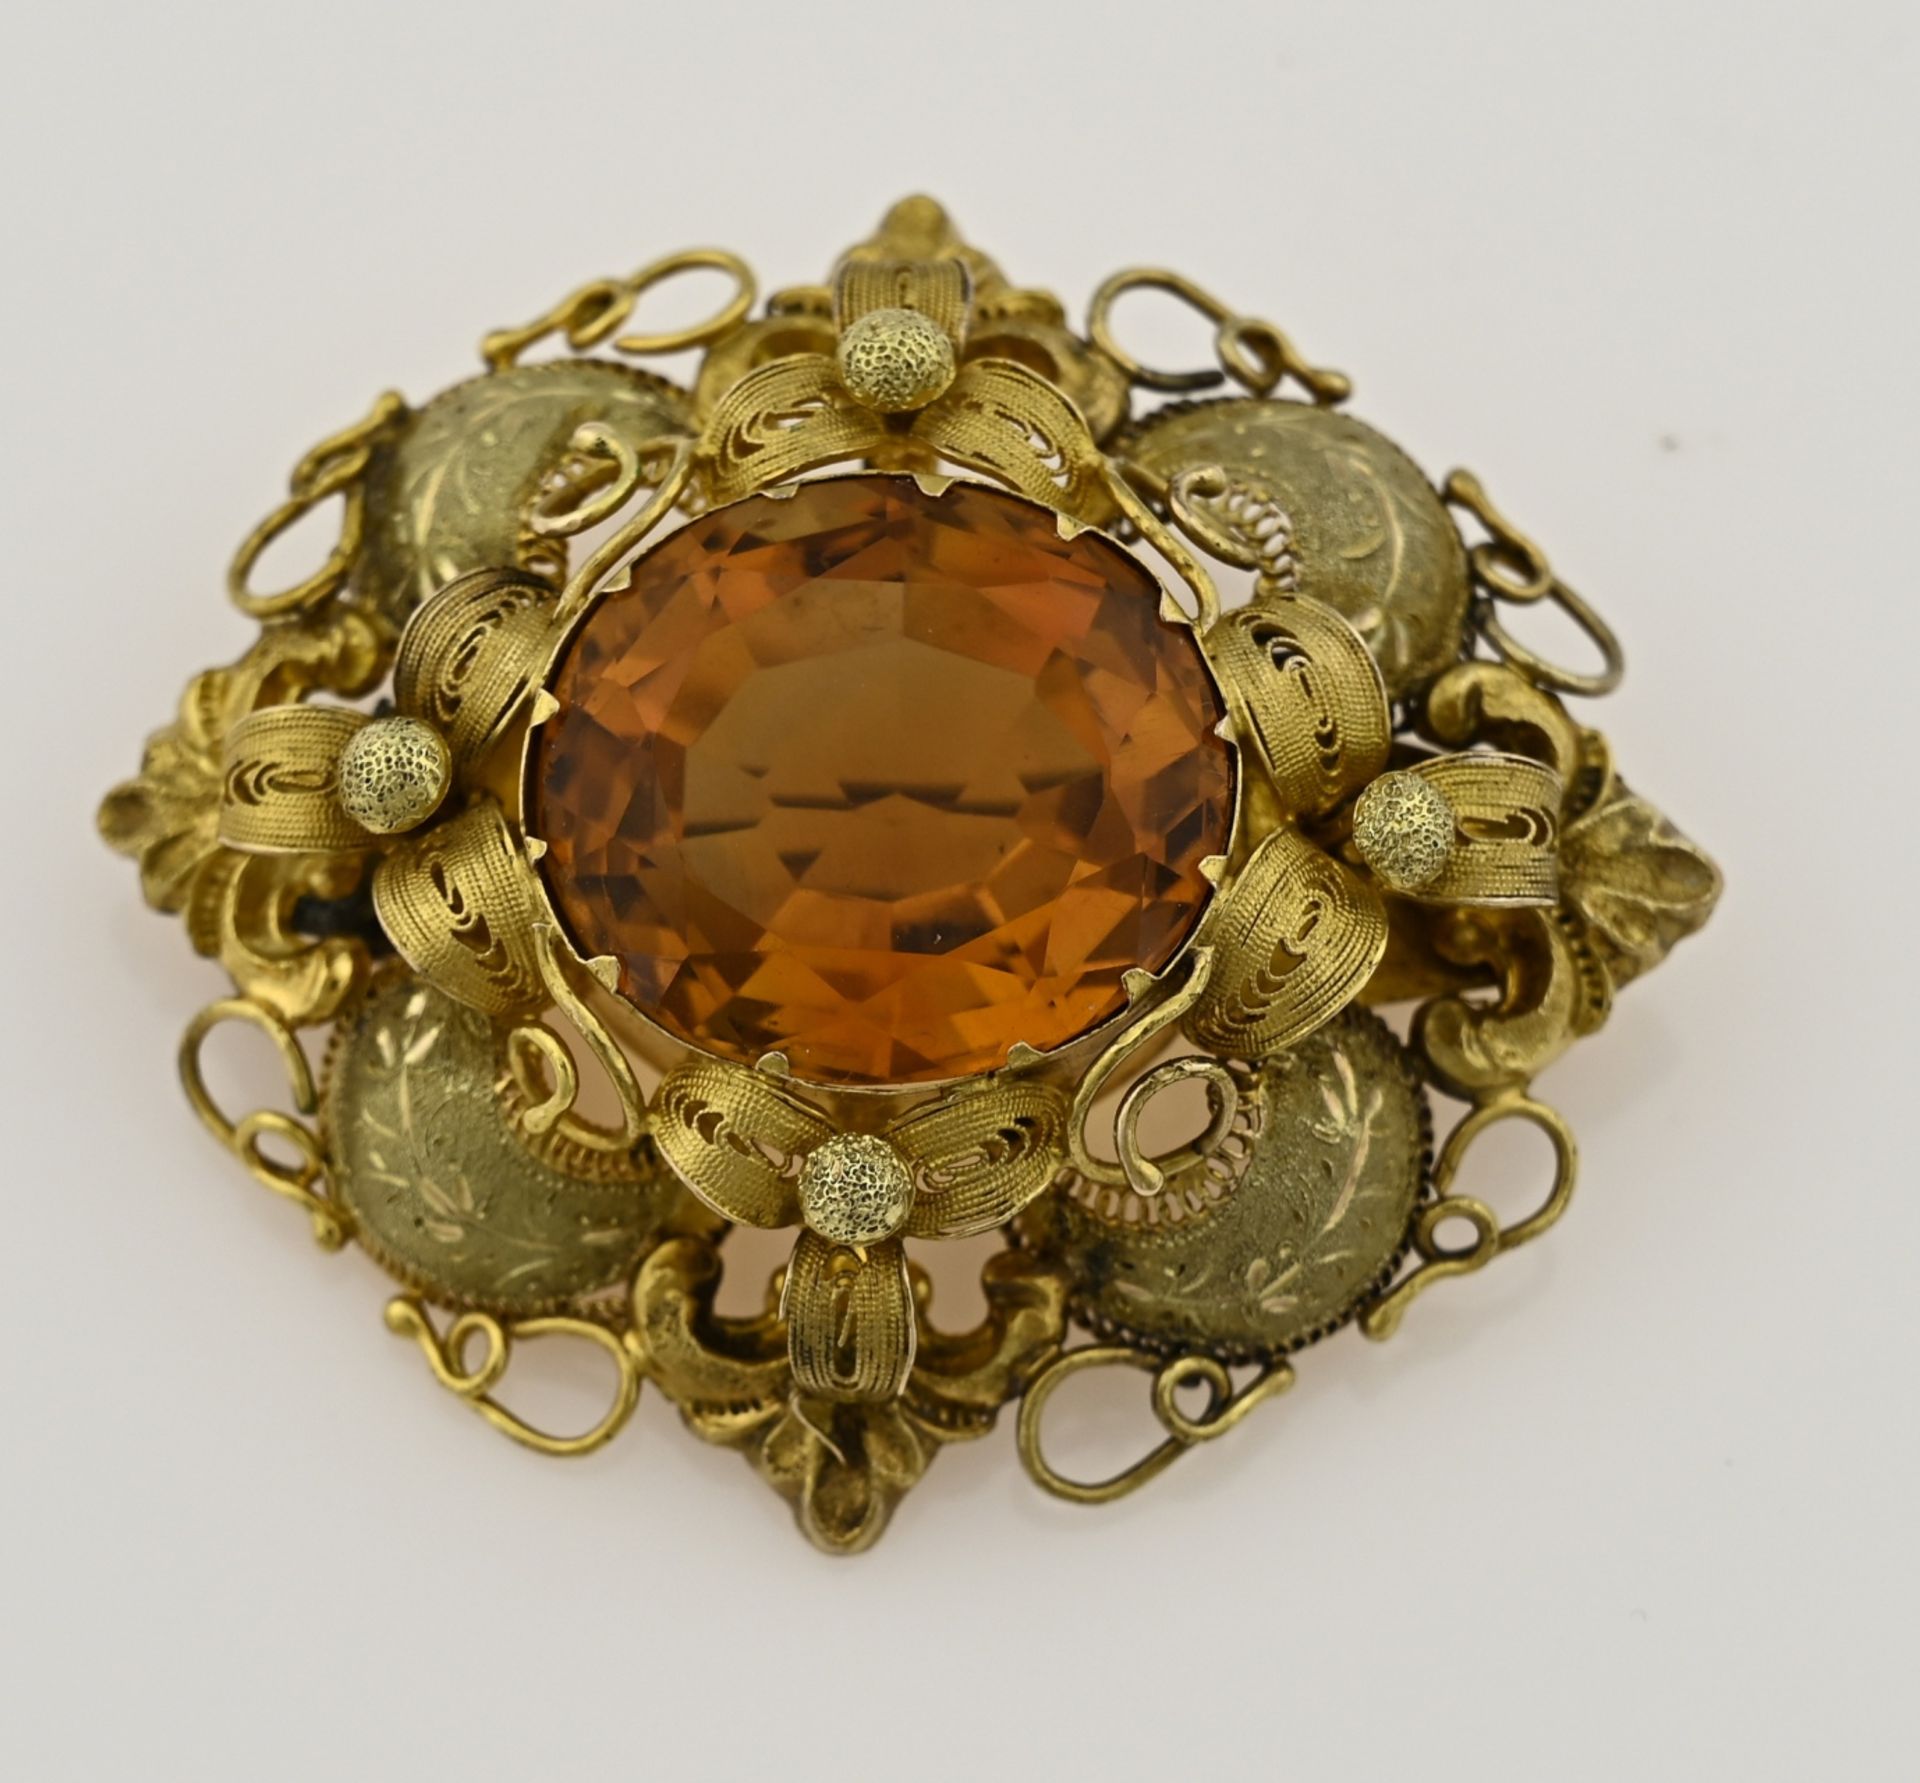 Gold brooch with citrine